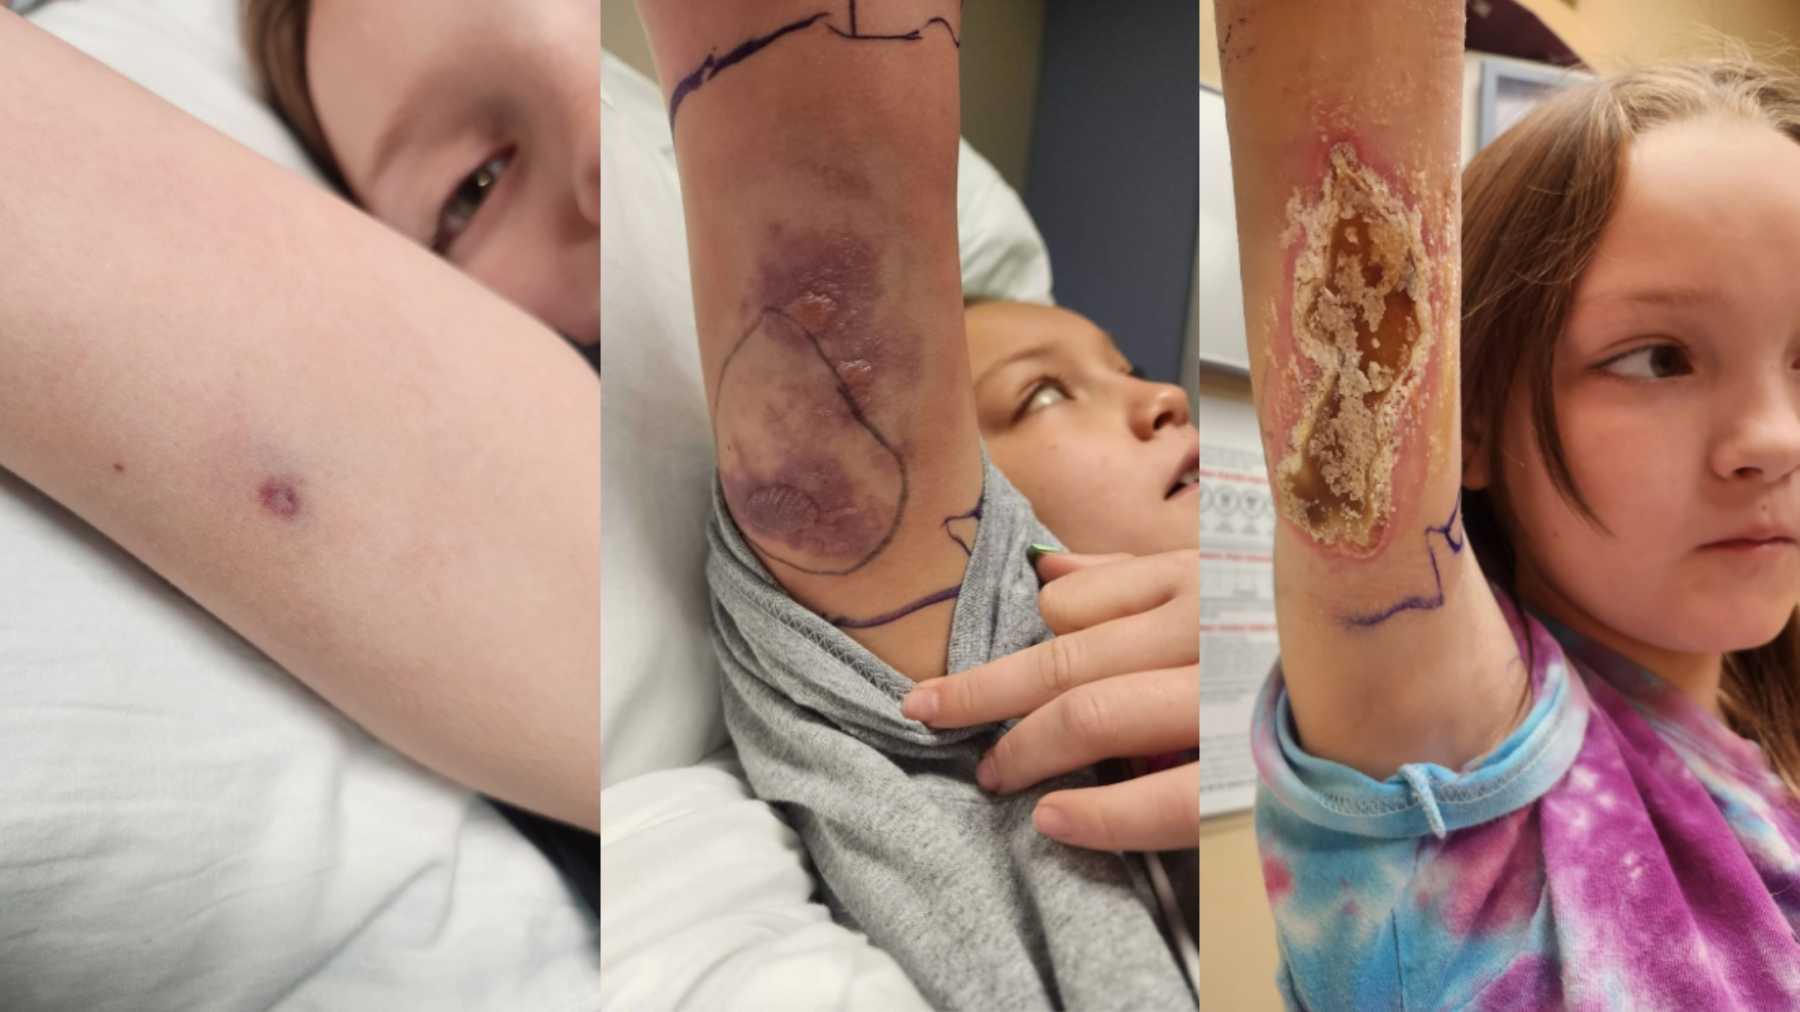 Girl, 9, Thinks Tag Pinched Her, Mom Discovers Brown Recluse Spider Bite  (Exclusive)